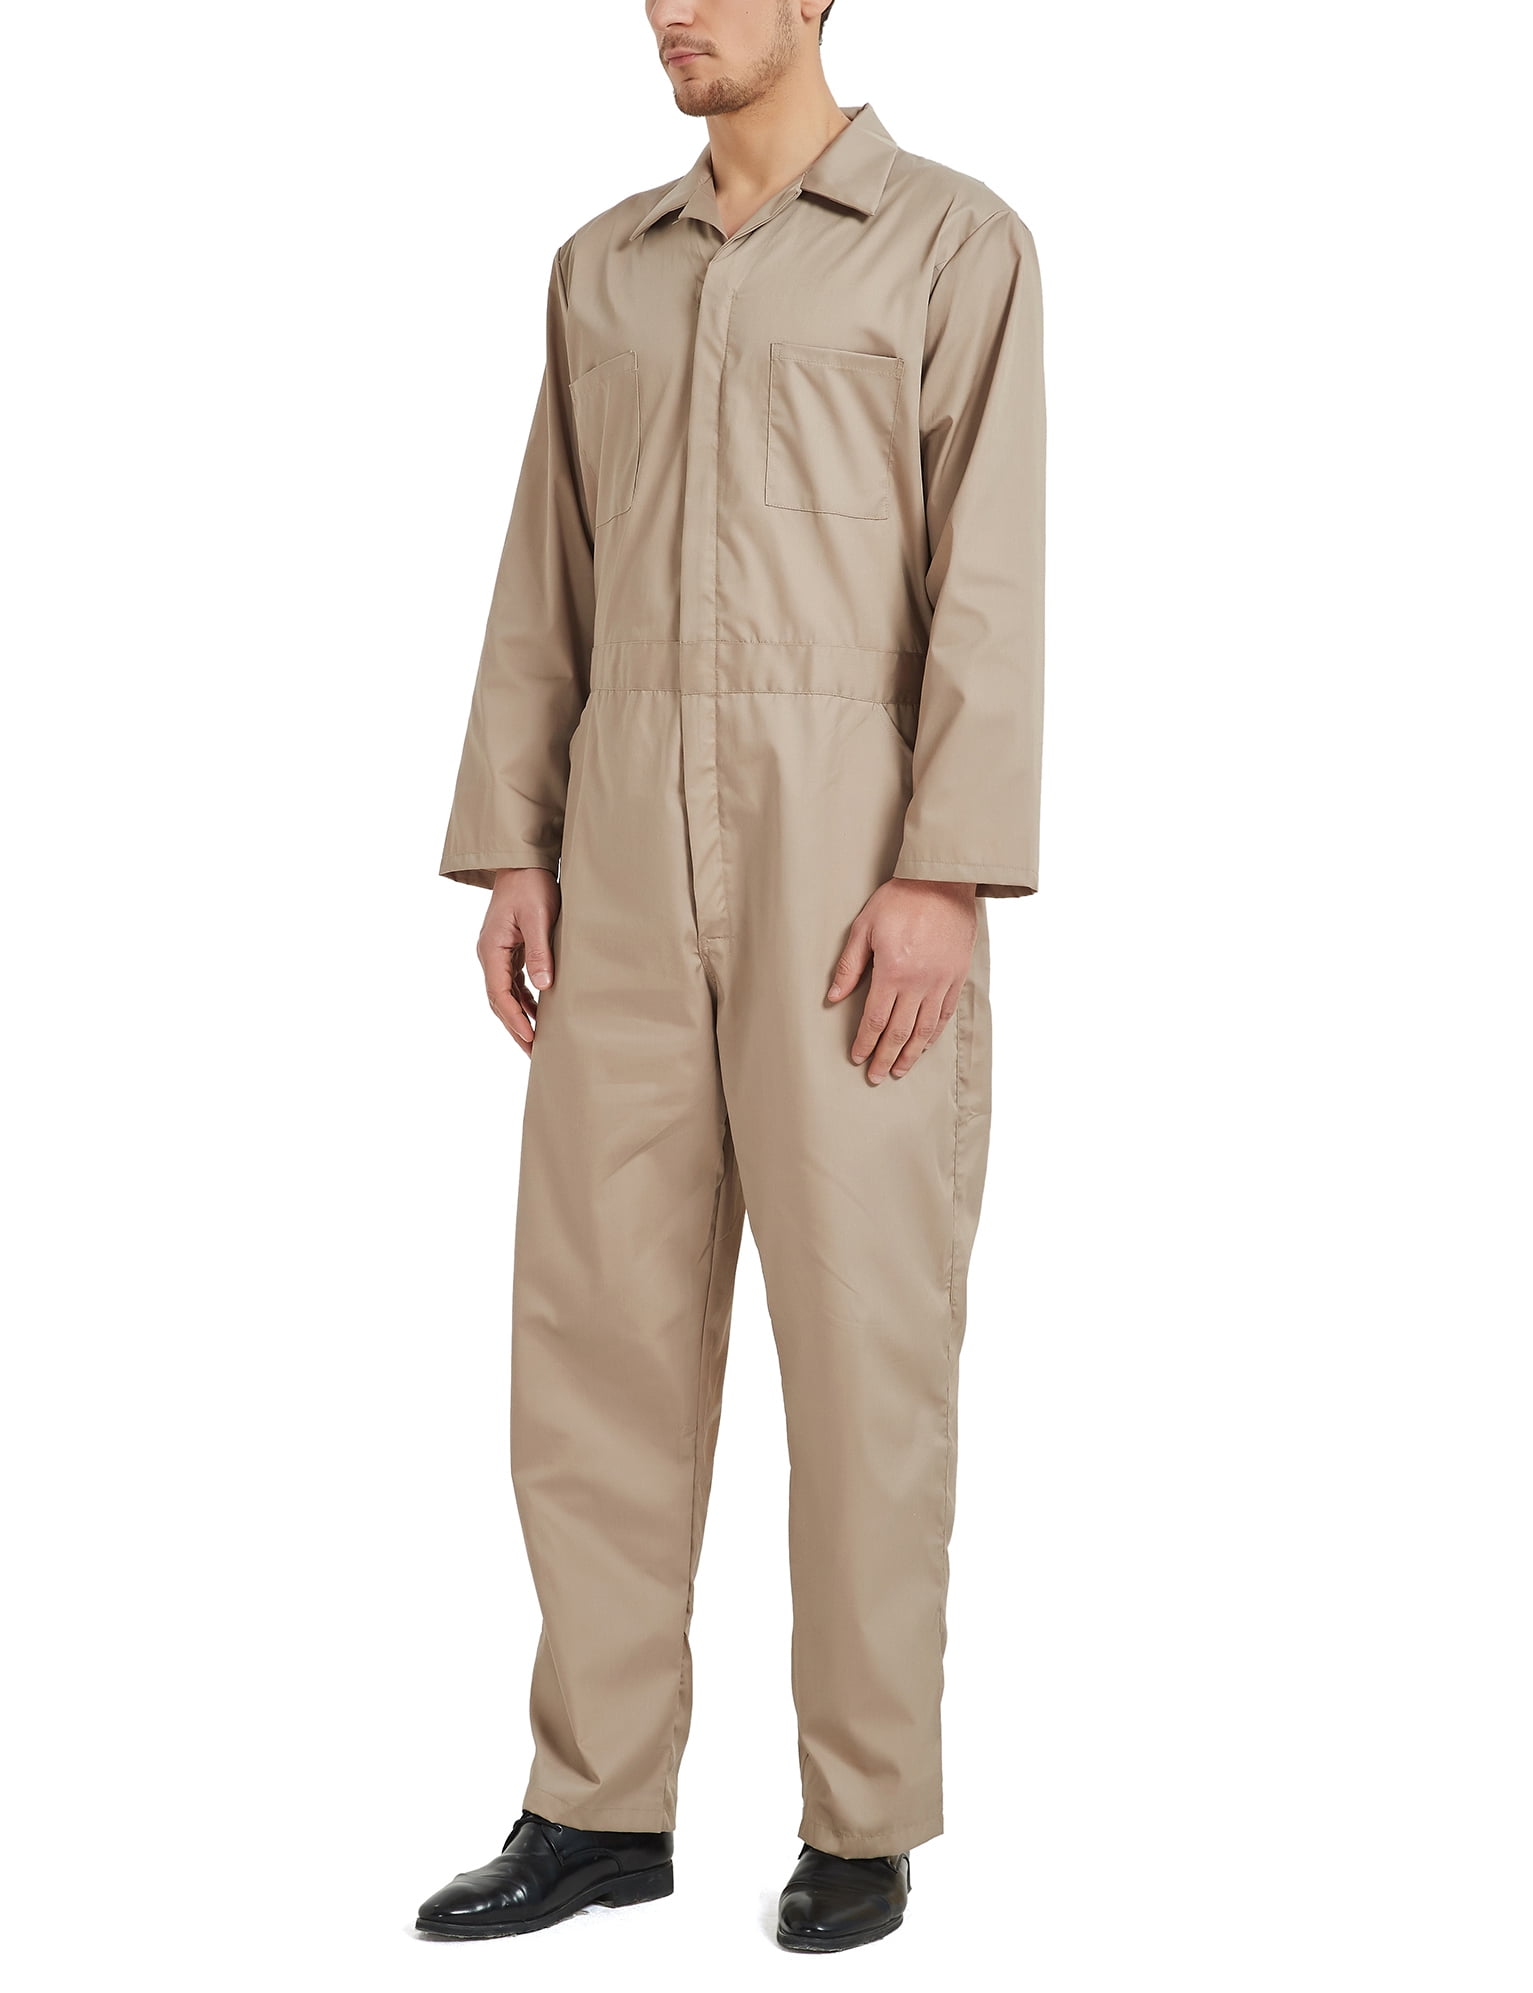 TopTie Mens Short-Sleeve Work Coverall Light Weight with Elastic Waist 